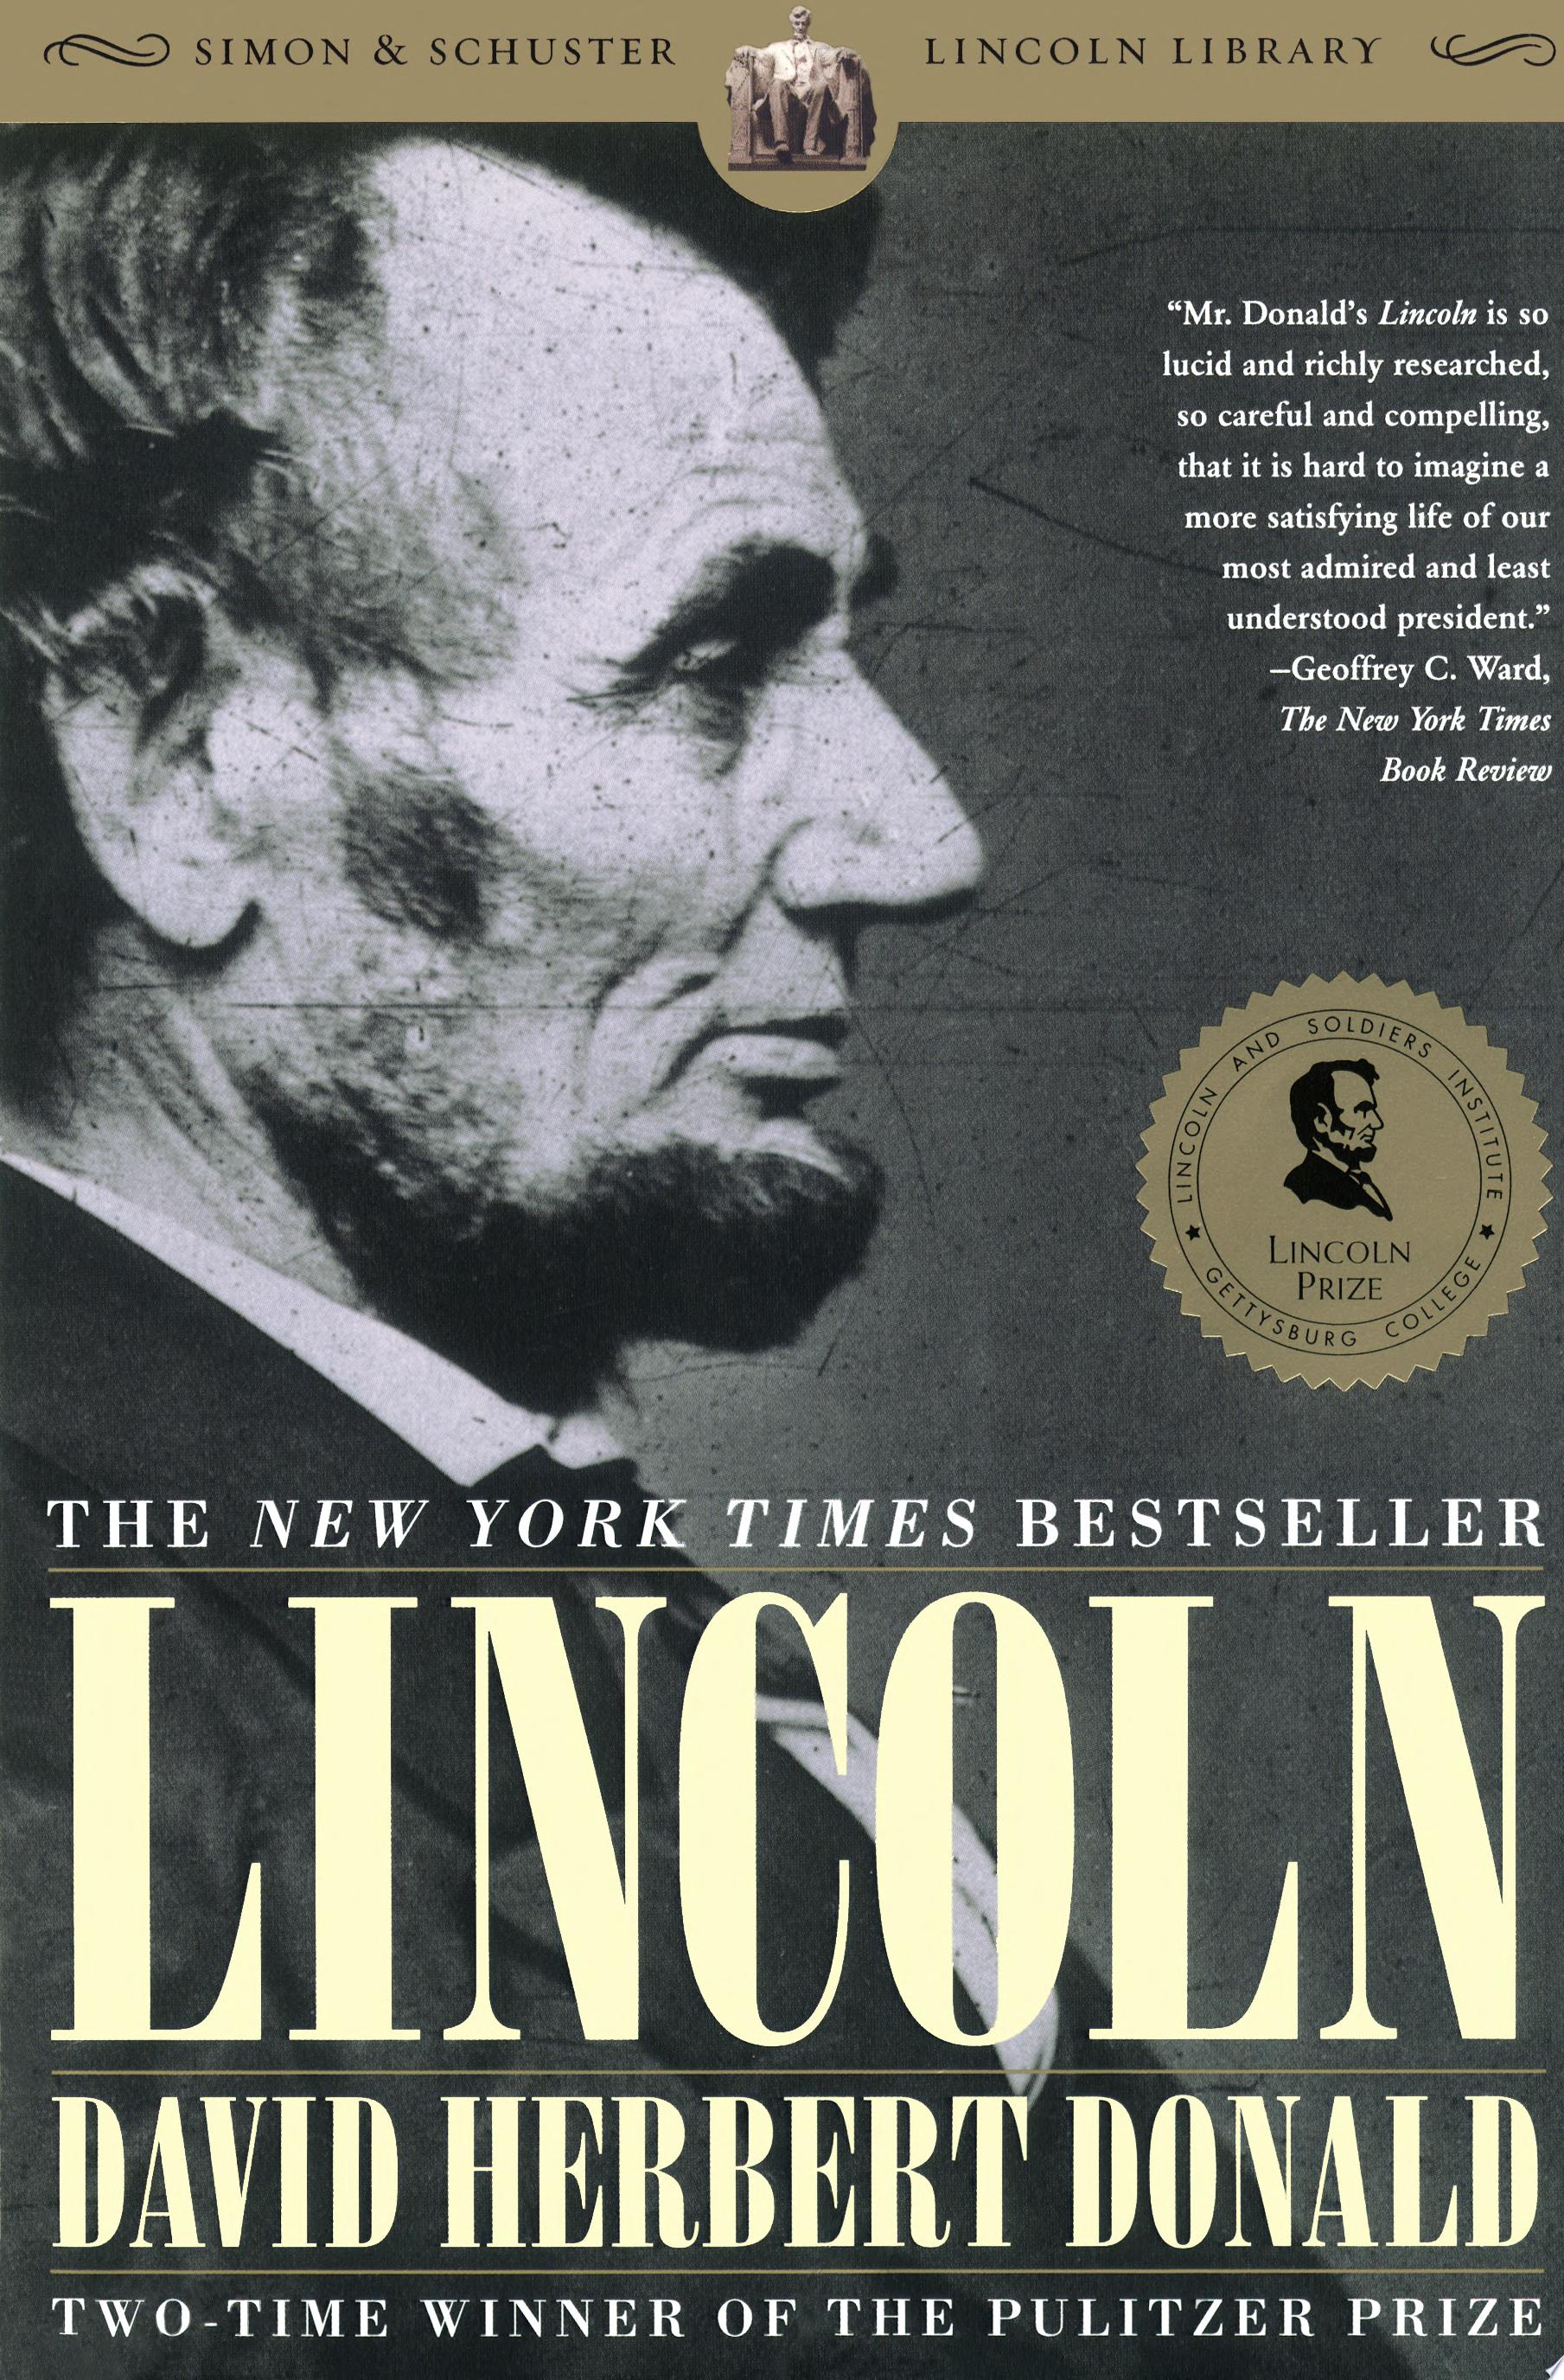 Image for "Lincoln"